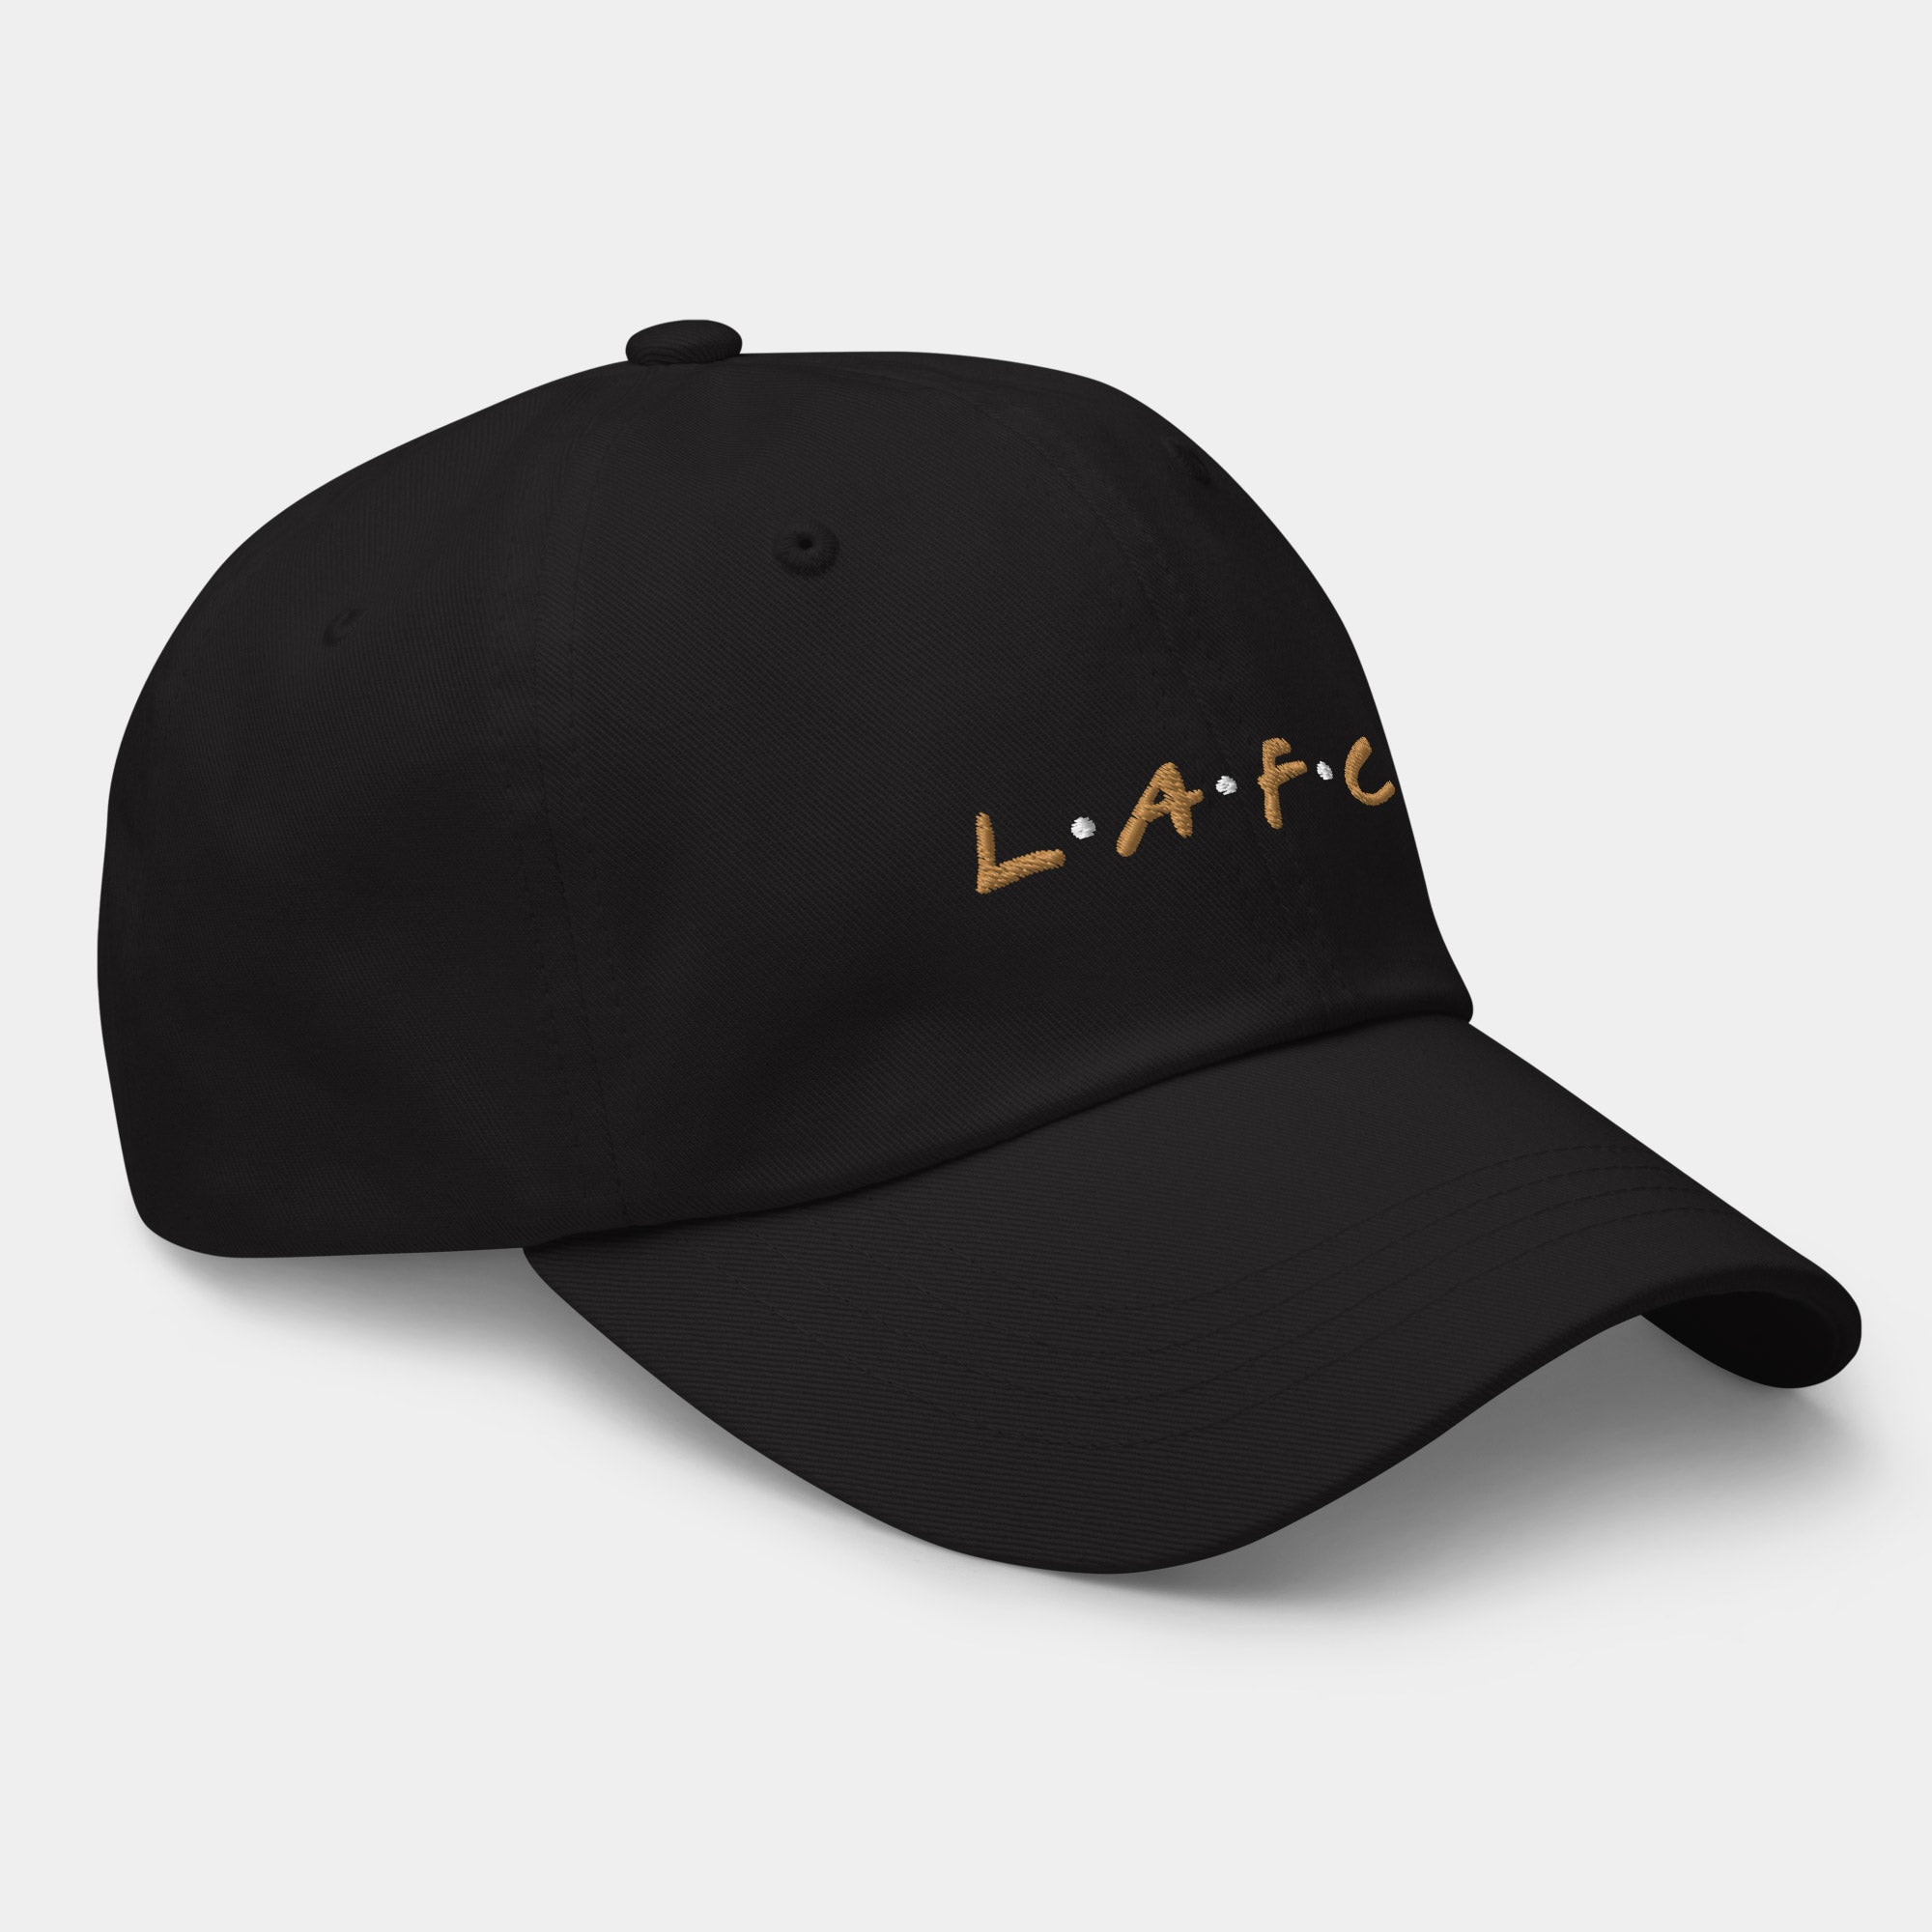 Stronger Together (LAFC) Cap